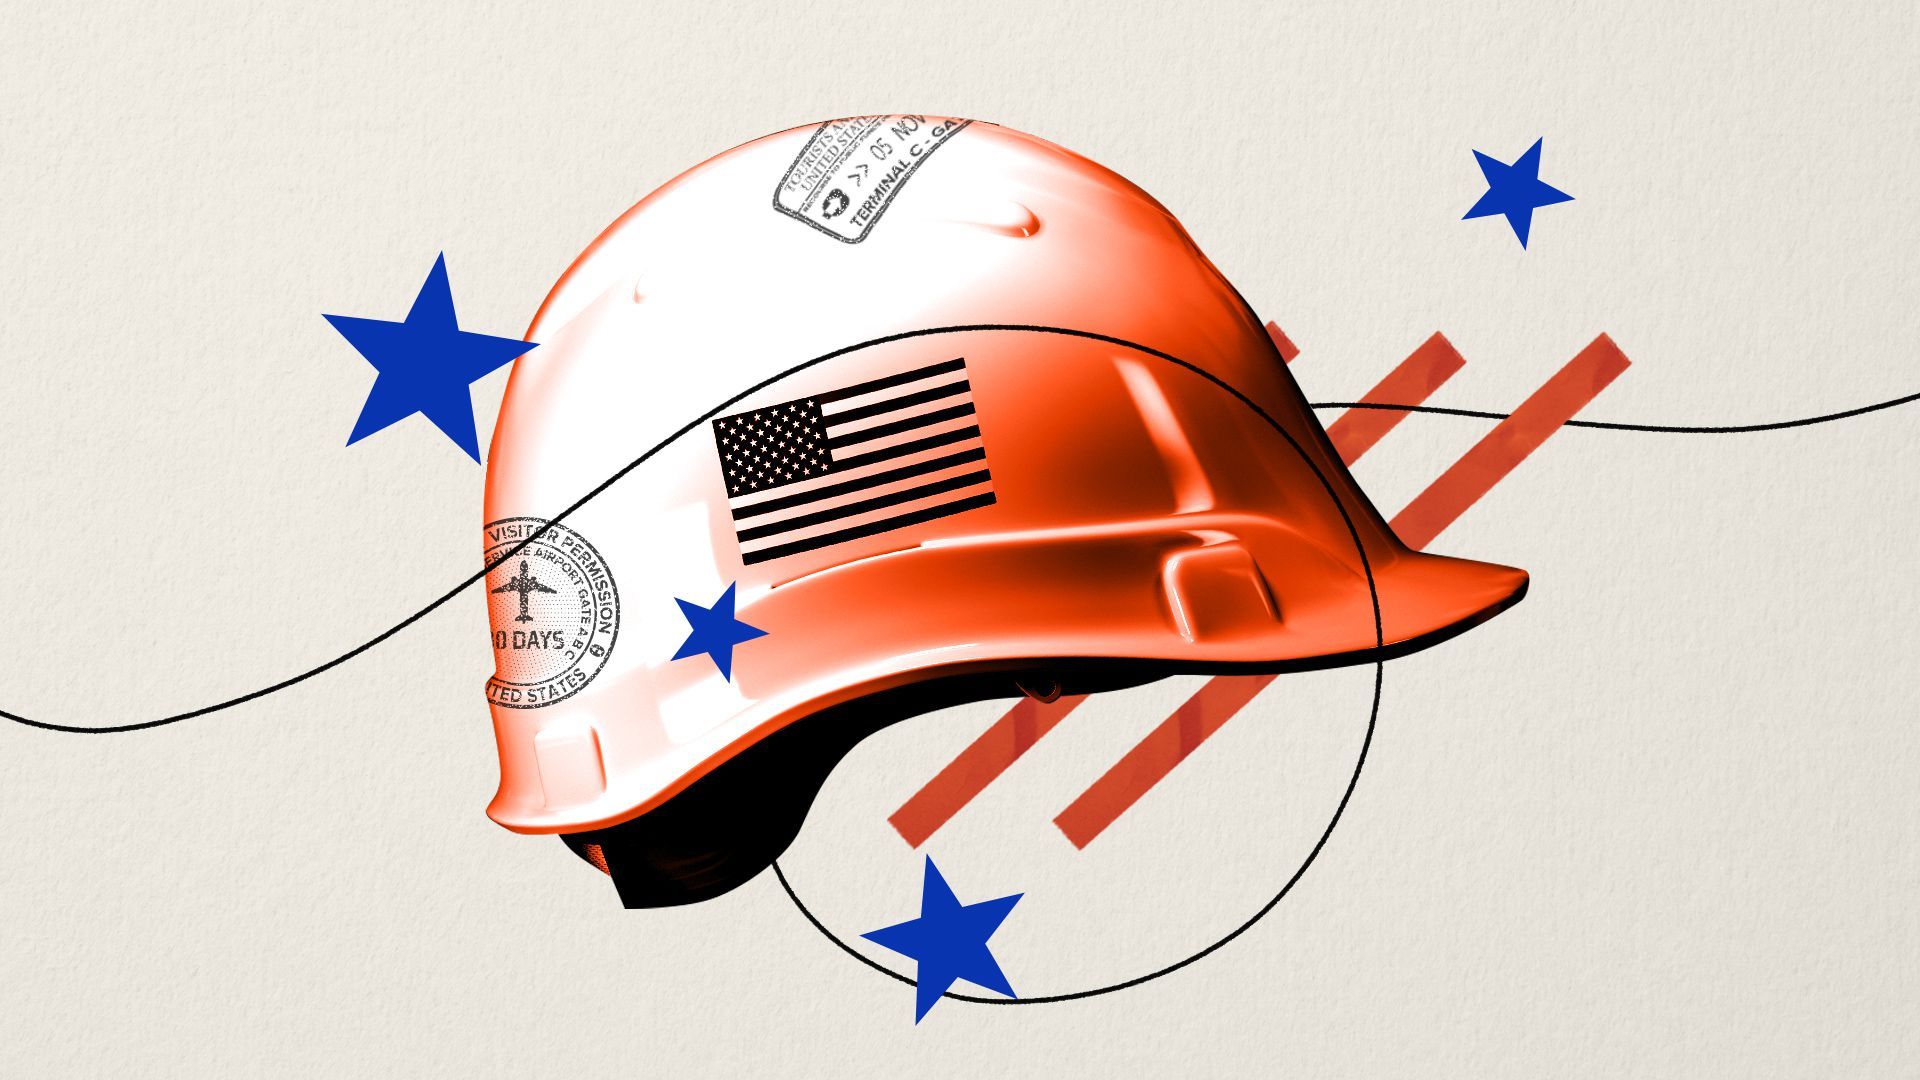 Illustrated collage of a hard hat with an American flag and travel stamps surrounded by stars and stripes. 